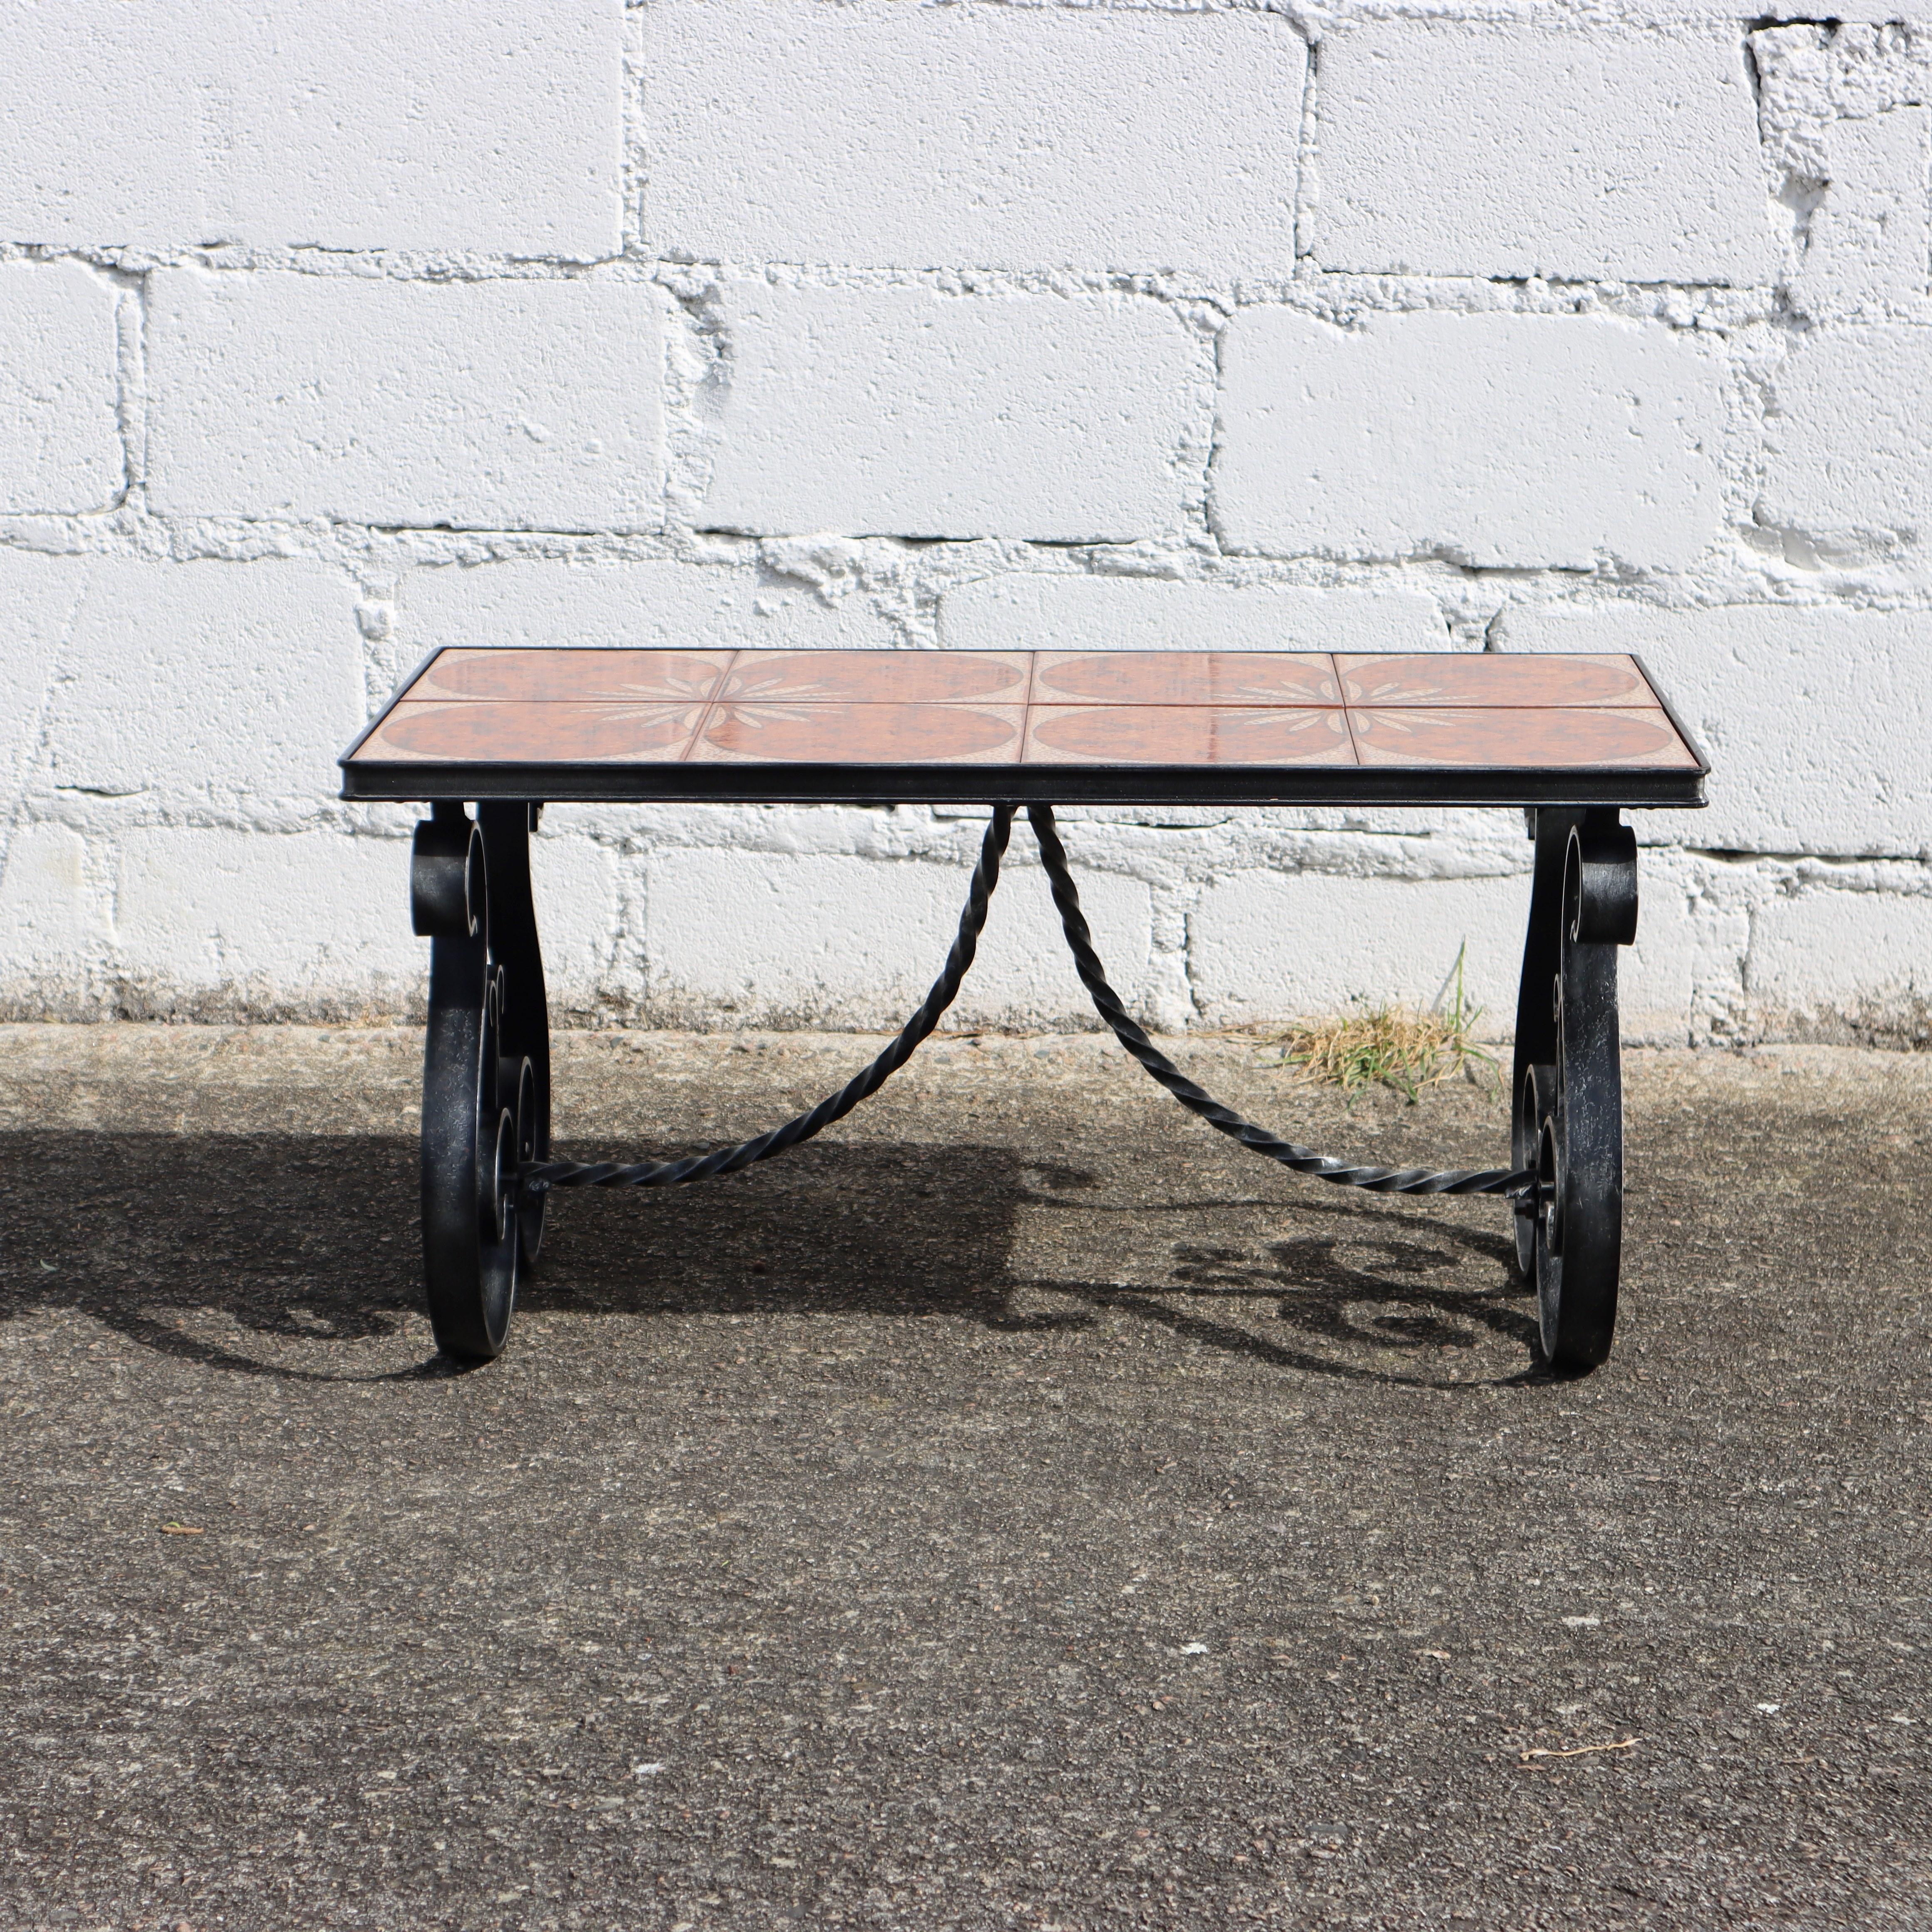 Vintage Forged Iron and Ceramic Coffee Table - Cocktail Table - Patio Table-60s In Good Condition For Sale In Bussiere Dunoise, Nouvel Aquitaine